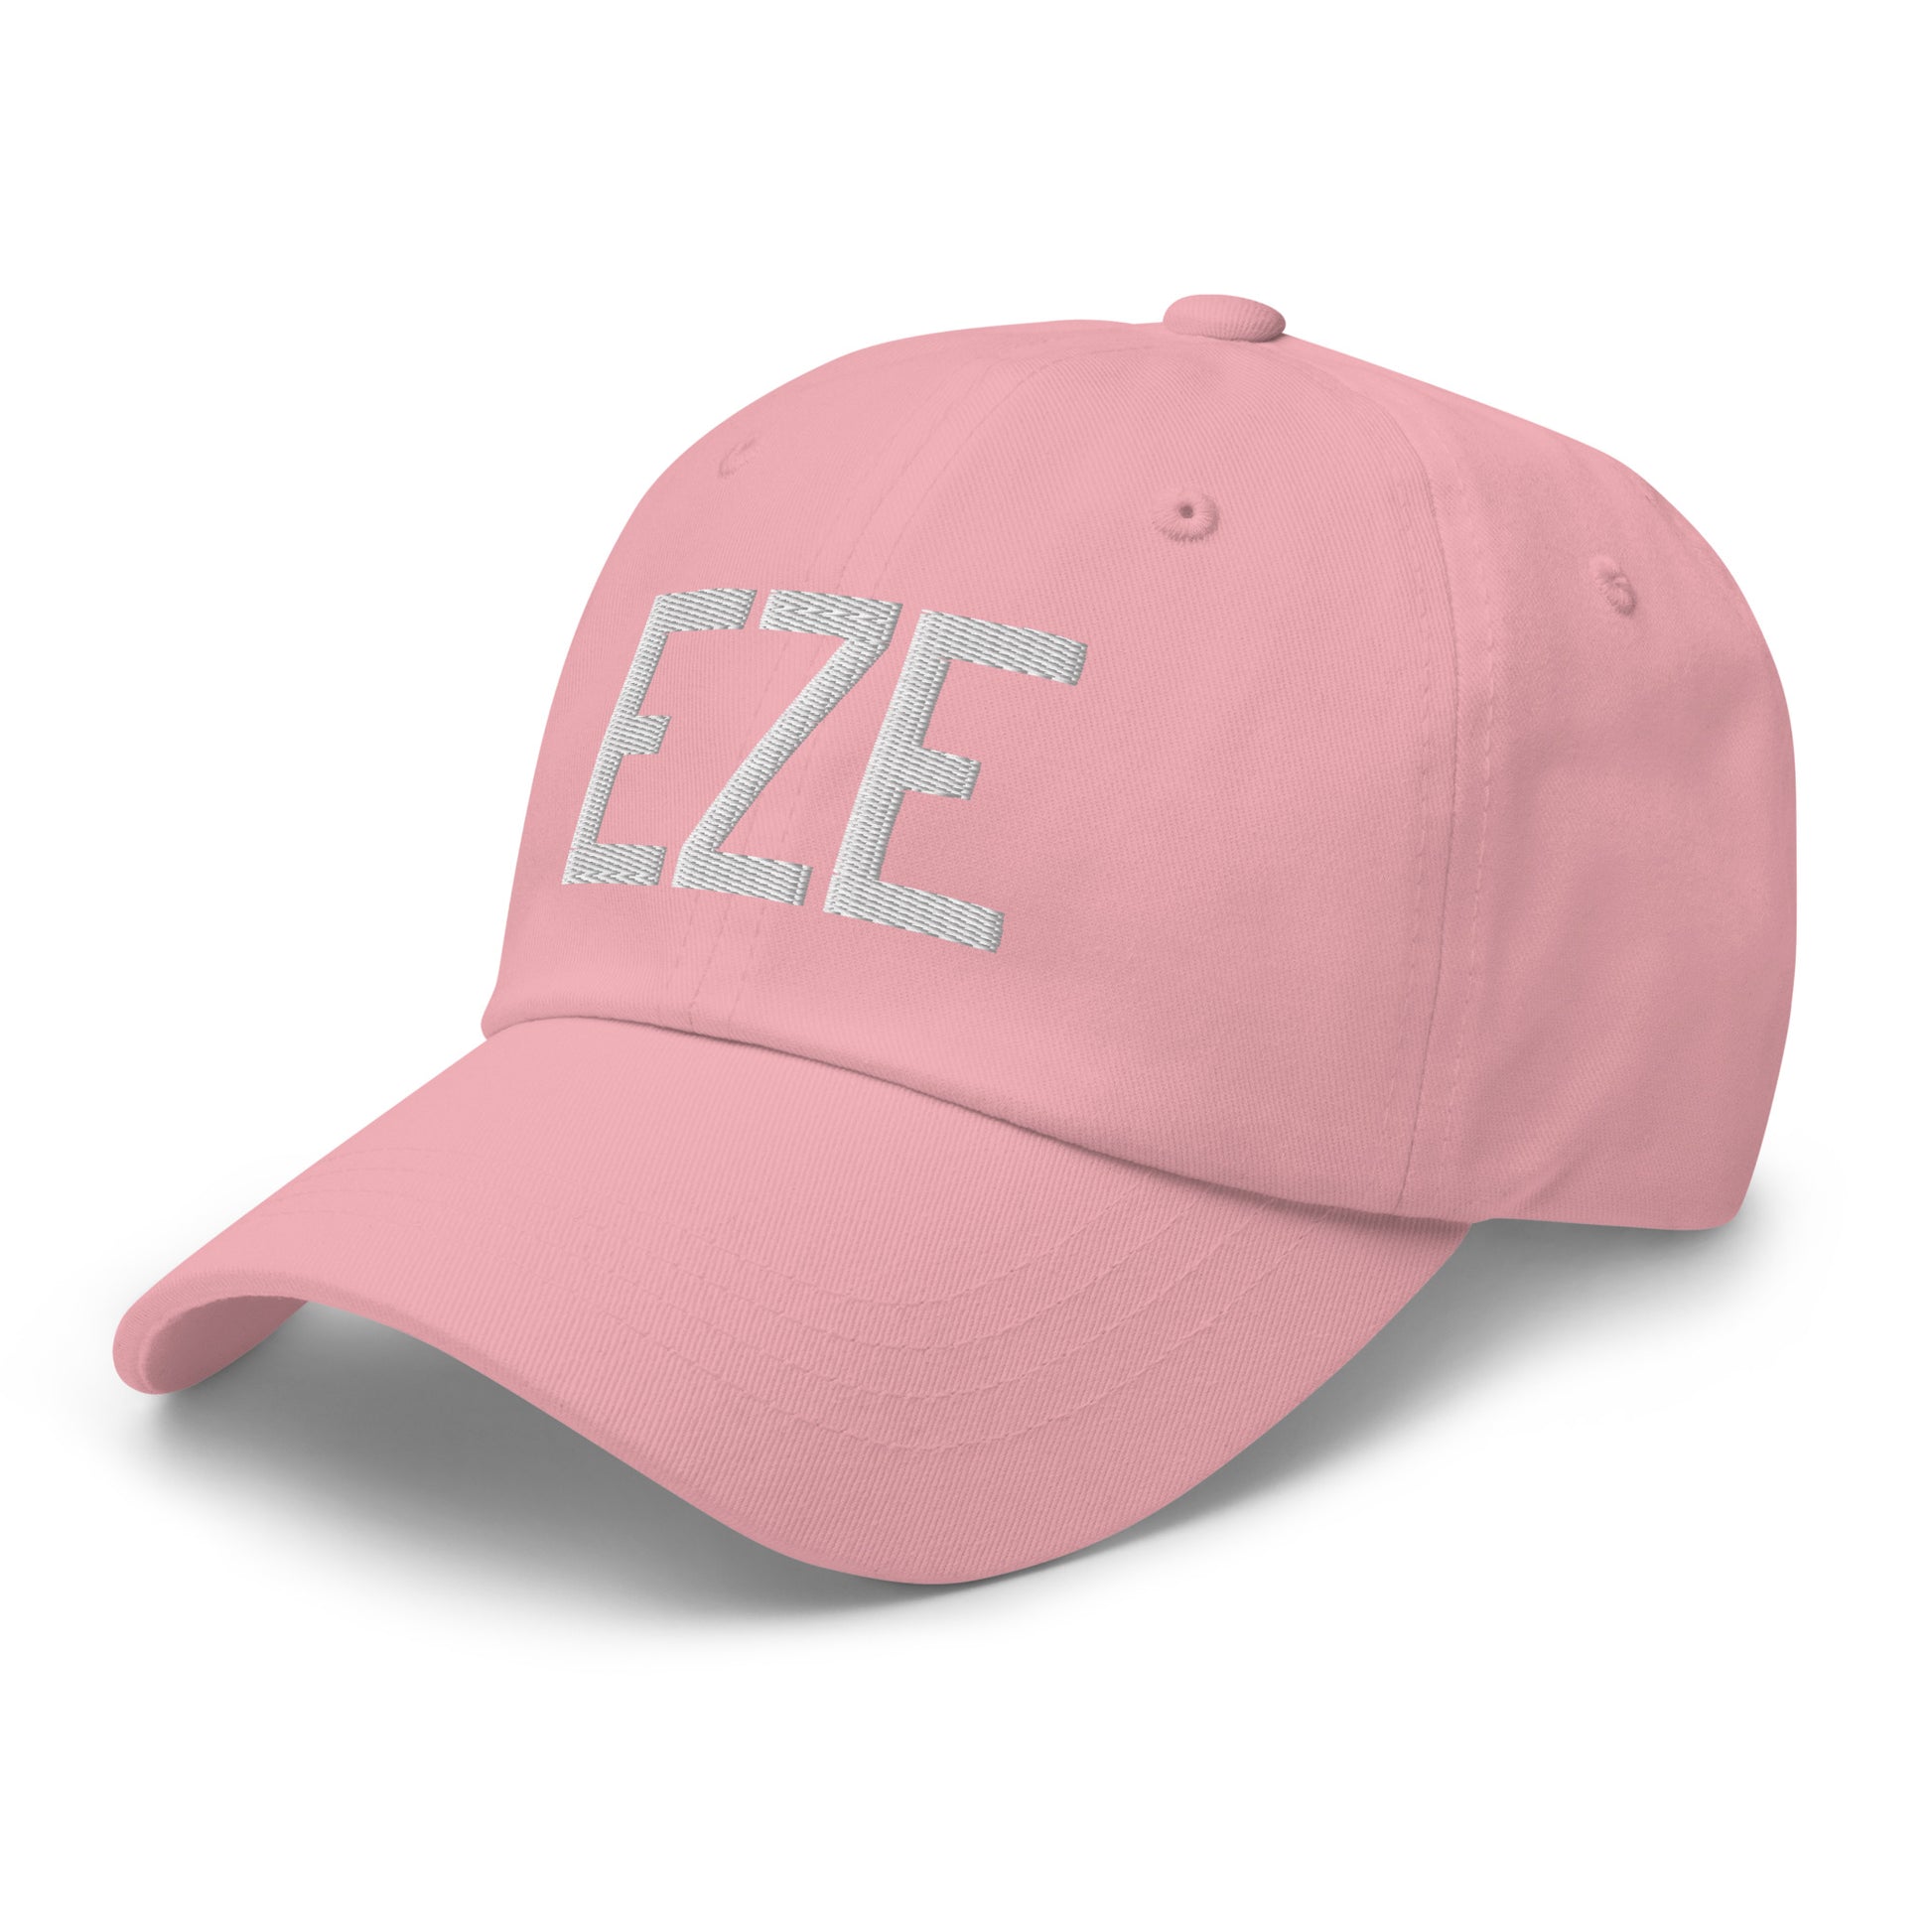 Airport Code Baseball Cap - White • EZE Buenos Aires • YHM Designs - Image 27